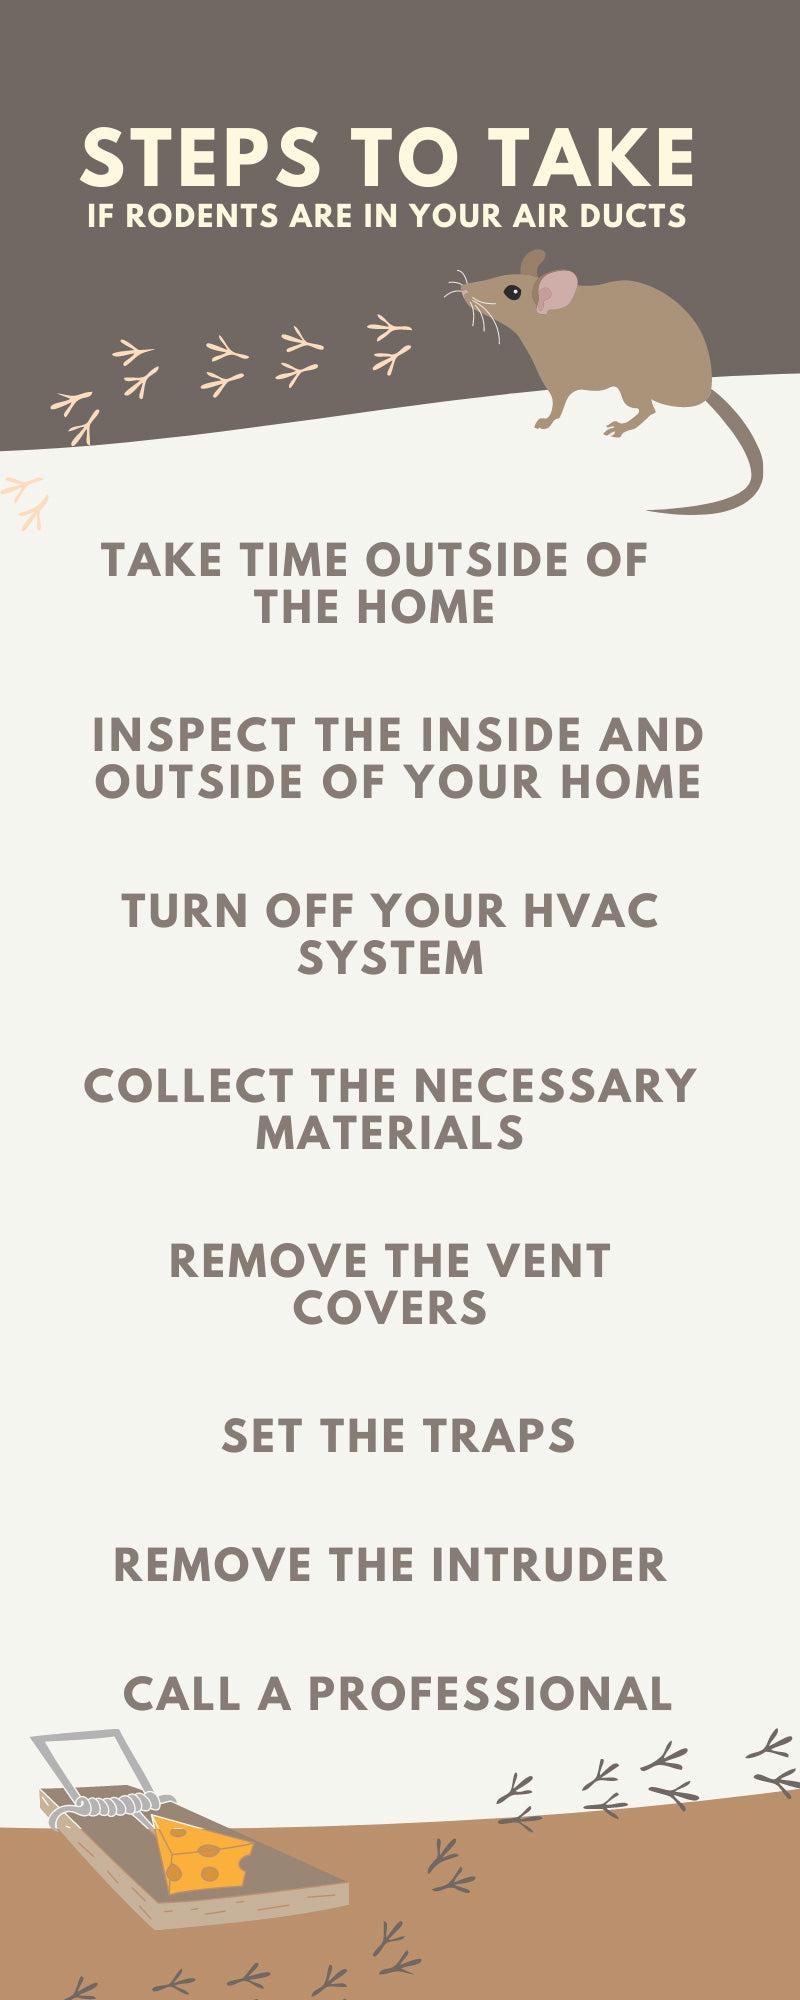 Steps To Take If Rodents Are In Your Air Ducts